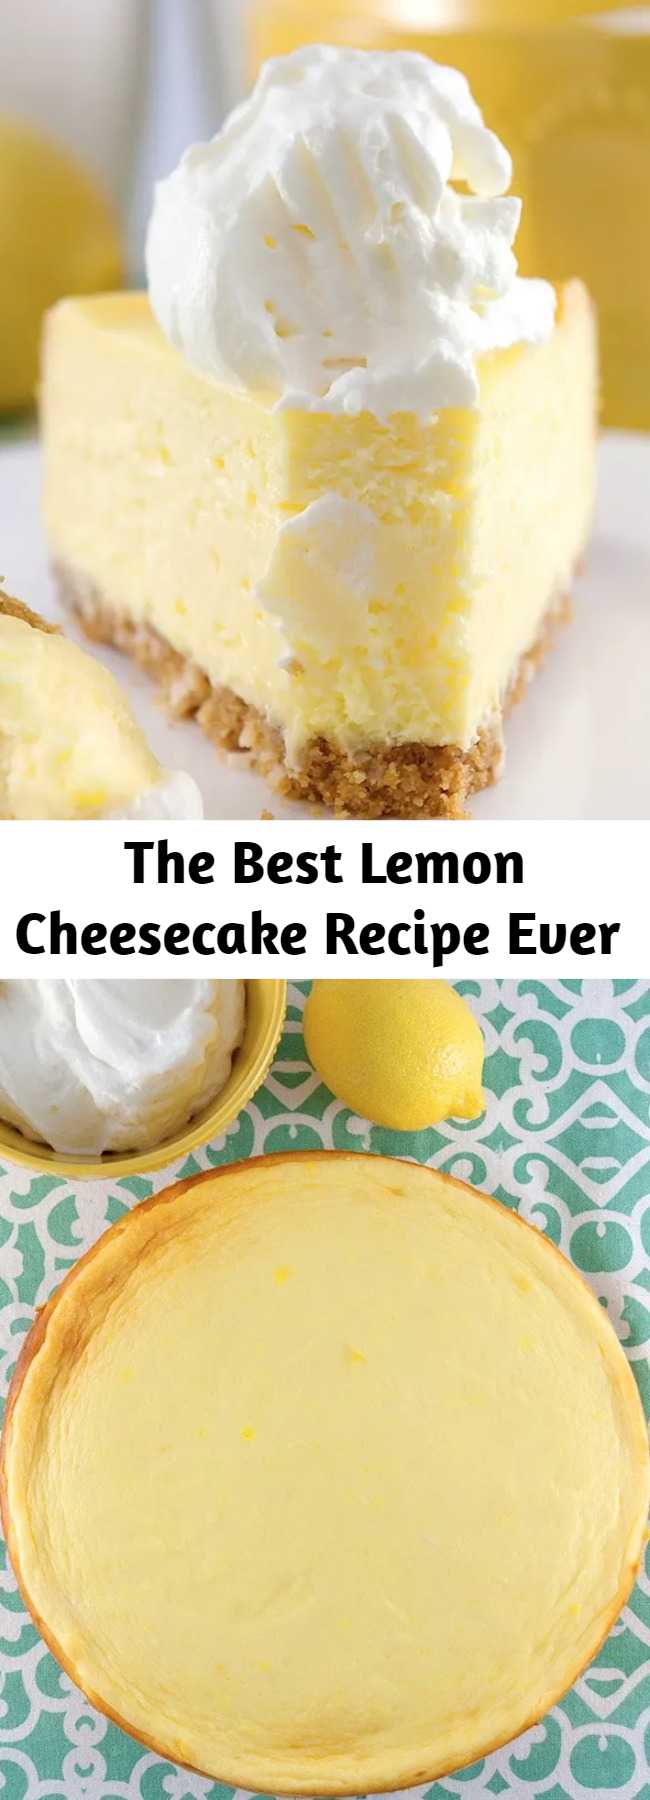 The Best Lemon Cheesecake Recipe Ever - The best lemon cheesecake ever. Exquisitely light and lemony. Perfectly sweet and tangy. Coconut cookie crust. Lemony whipped cream. This is it. The perfect lemon cheesecake.